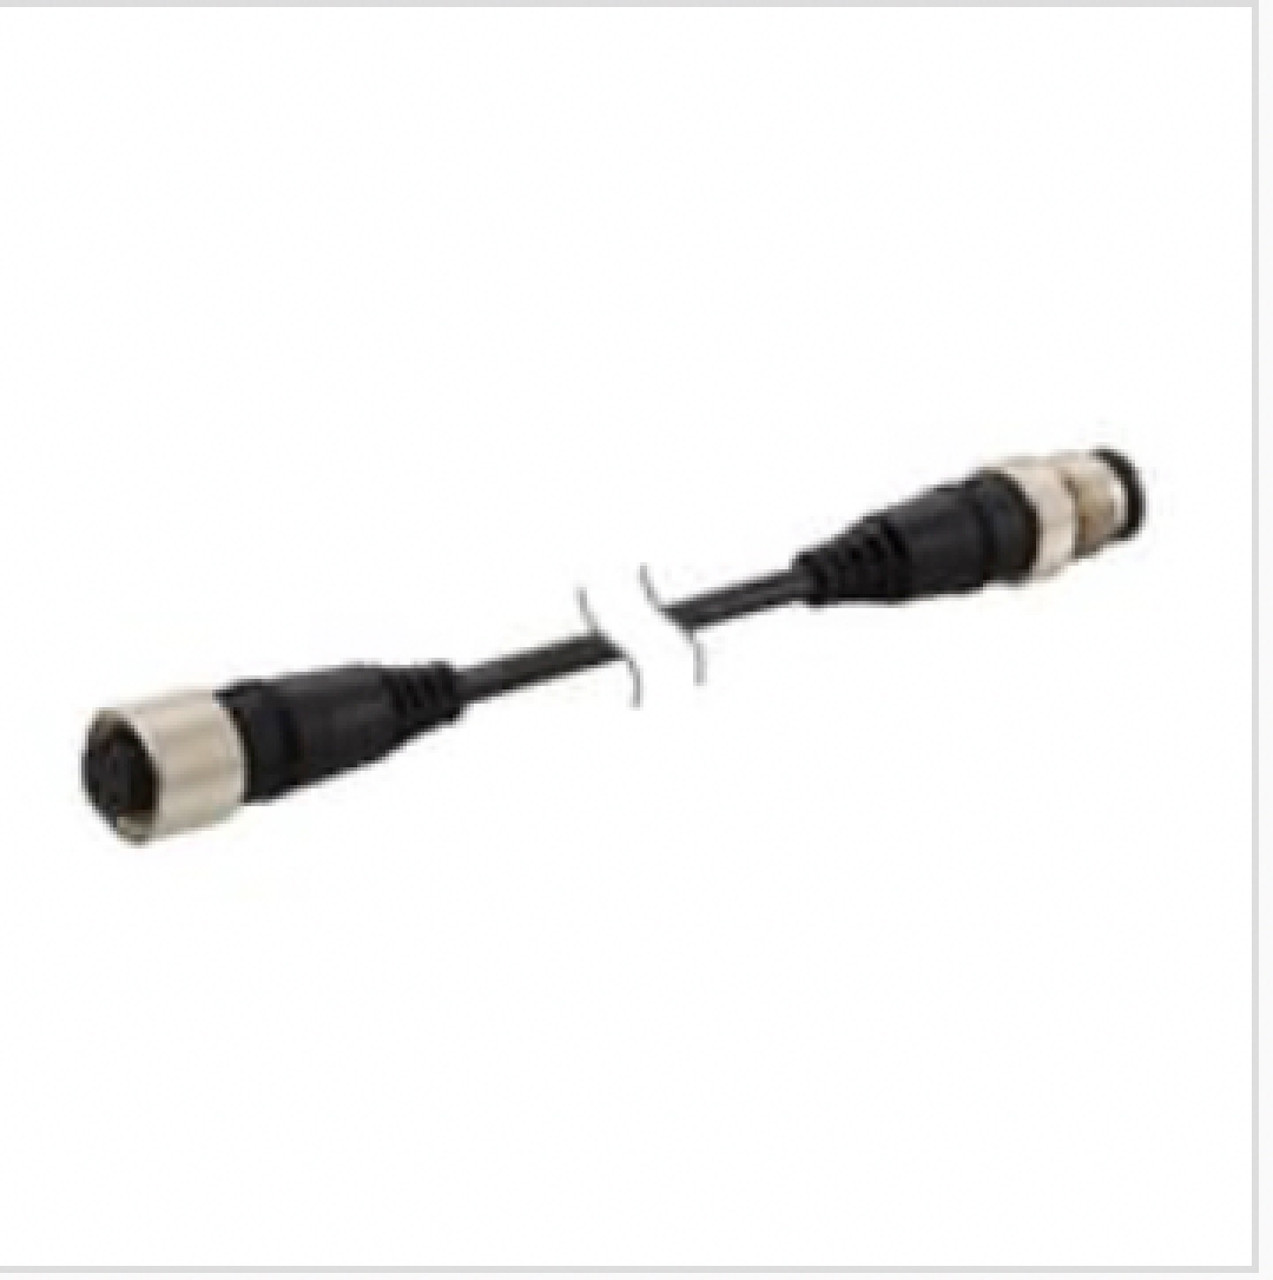 Keyence OP-85503 Photoelectric Sensor Connector Cable, M12, Straight 2-m L, PVC [New]